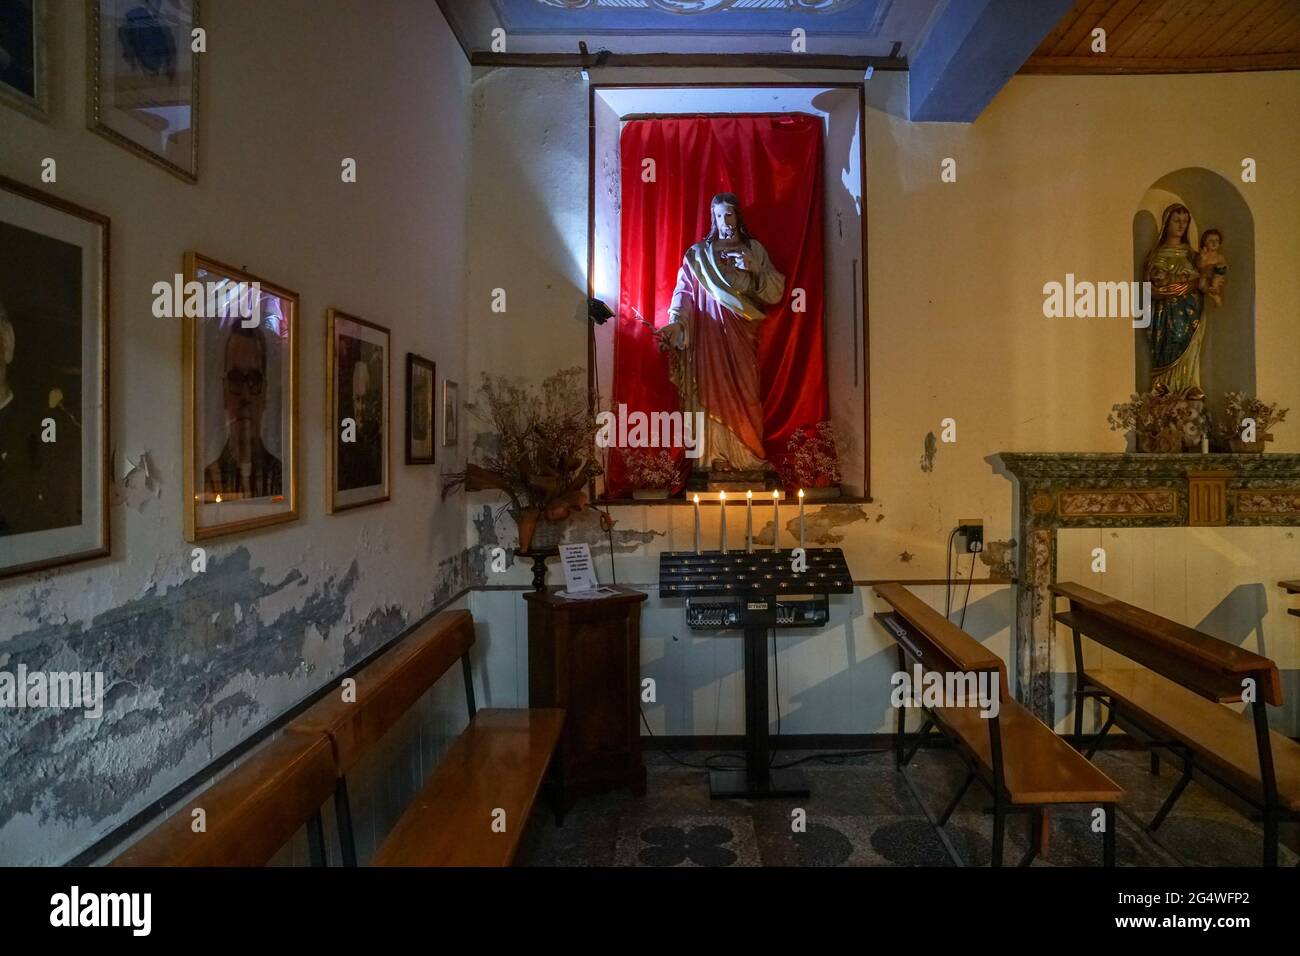 Pella - 07/12/2020: interior of small church with Christ statue and votive candles Stock Photo